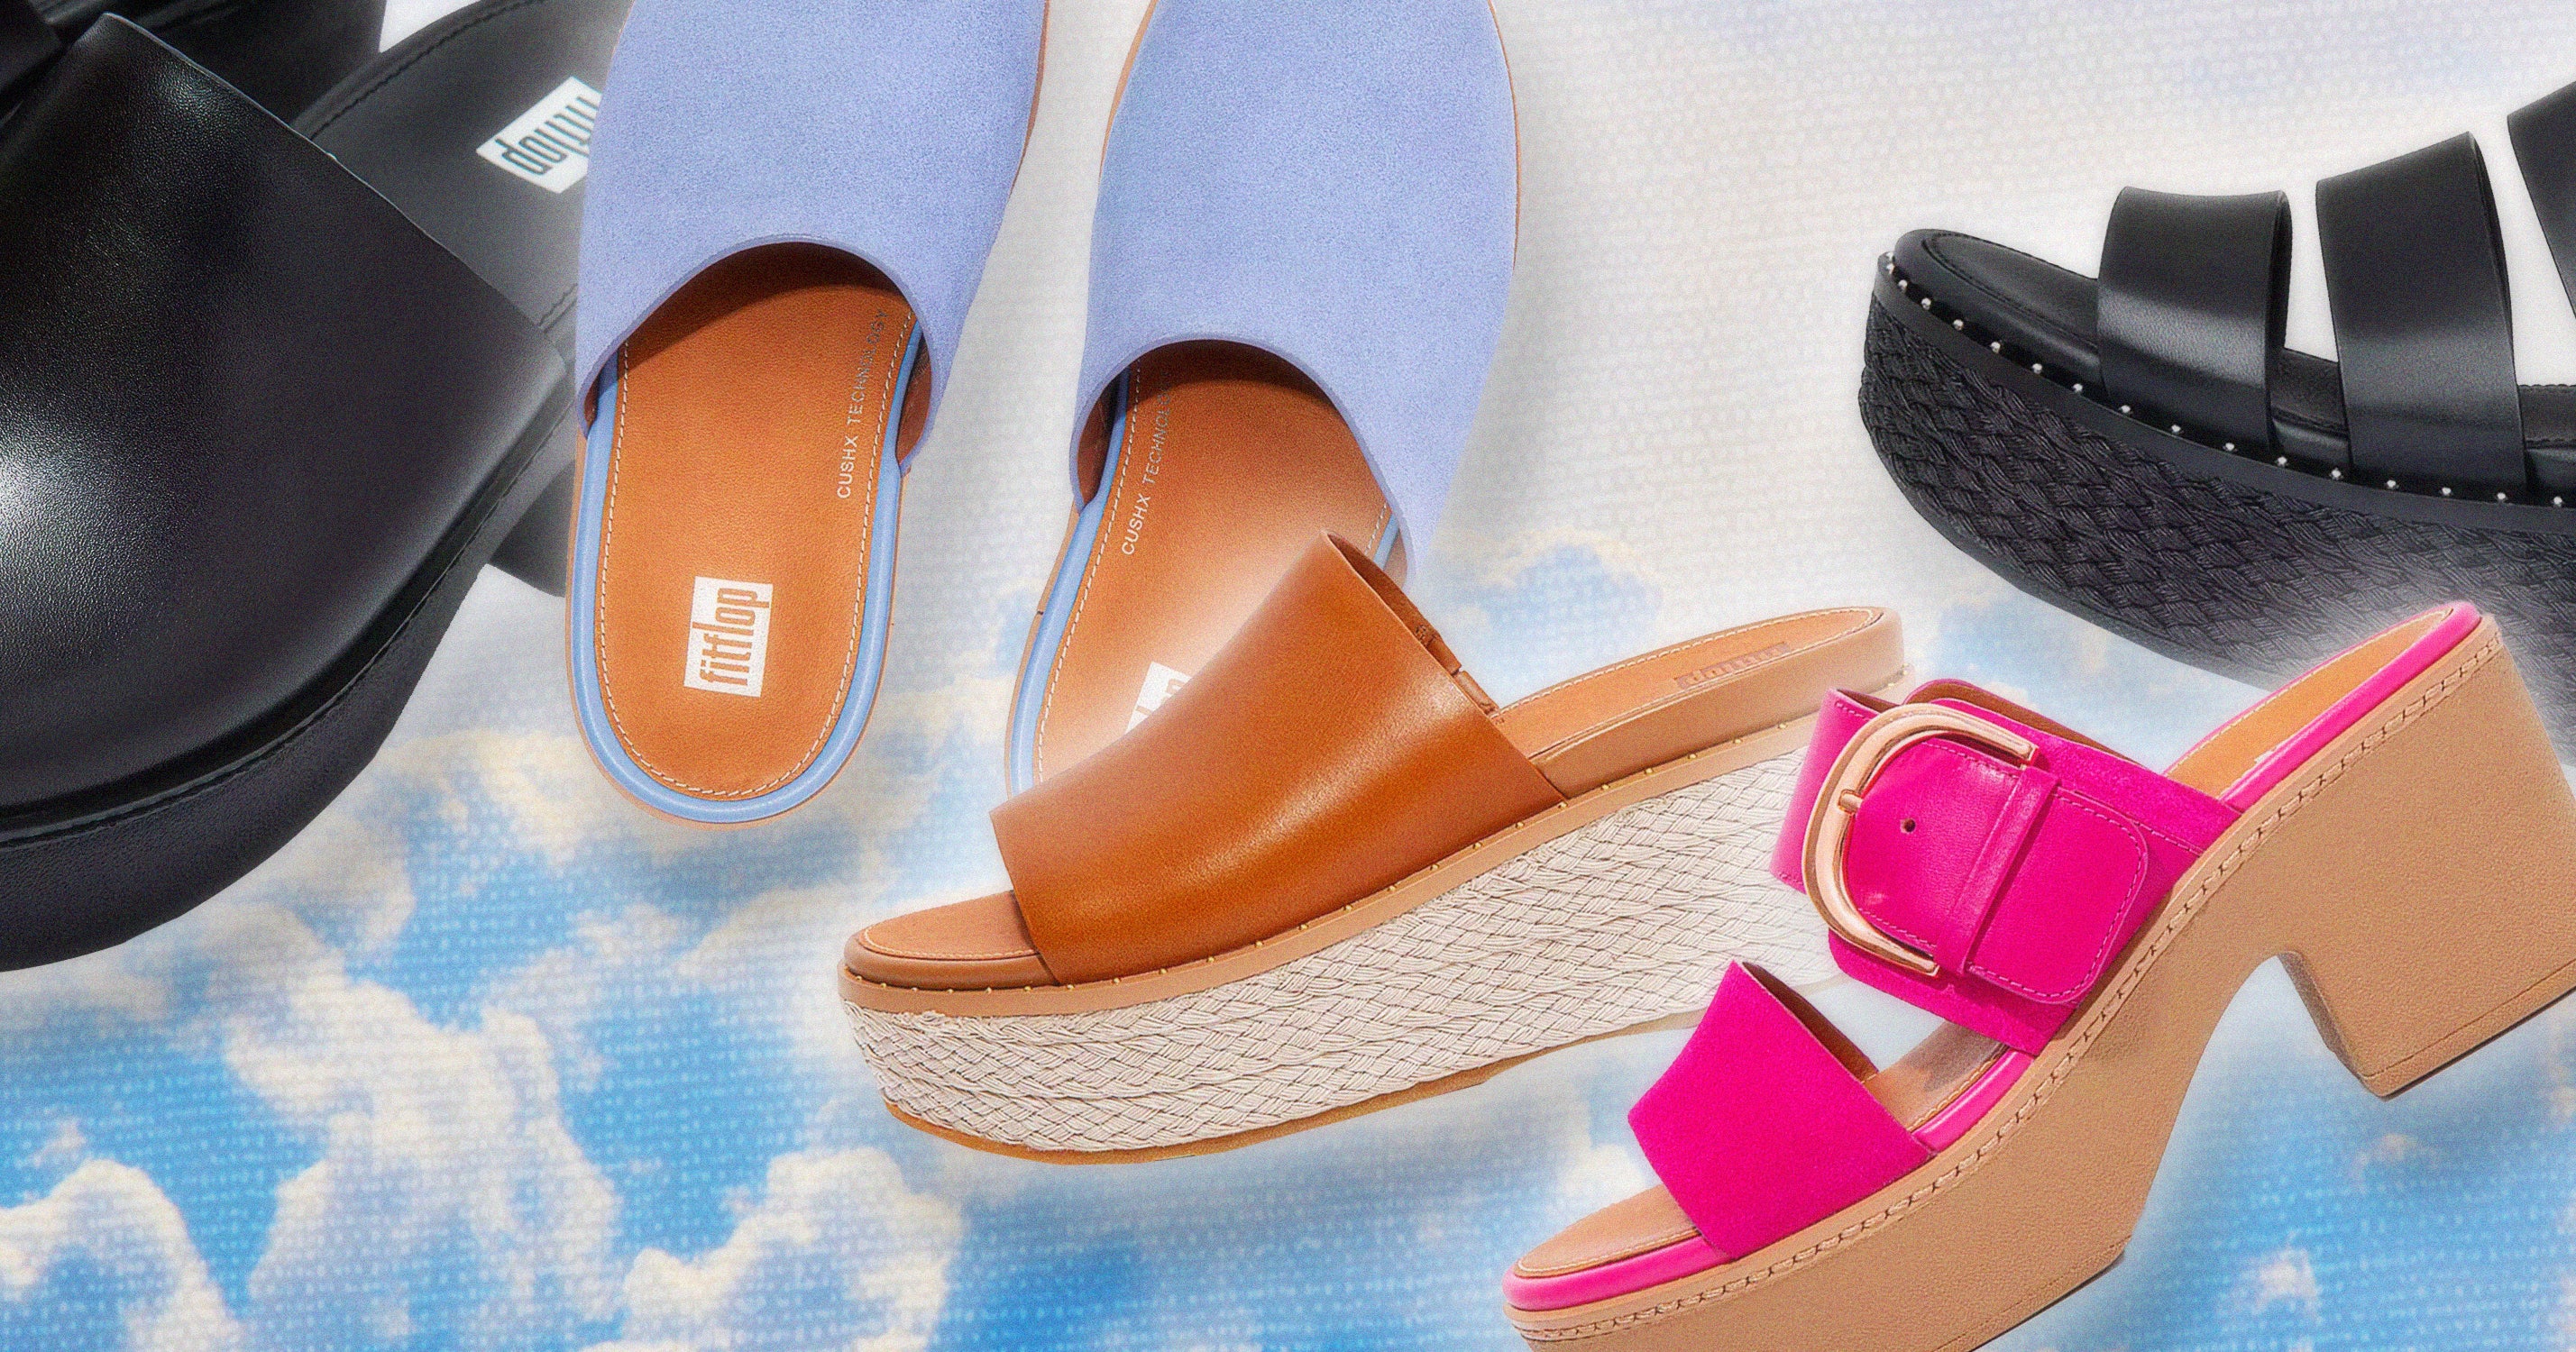 FitFlop Review: Comfortable Platform & Wedge Sandals